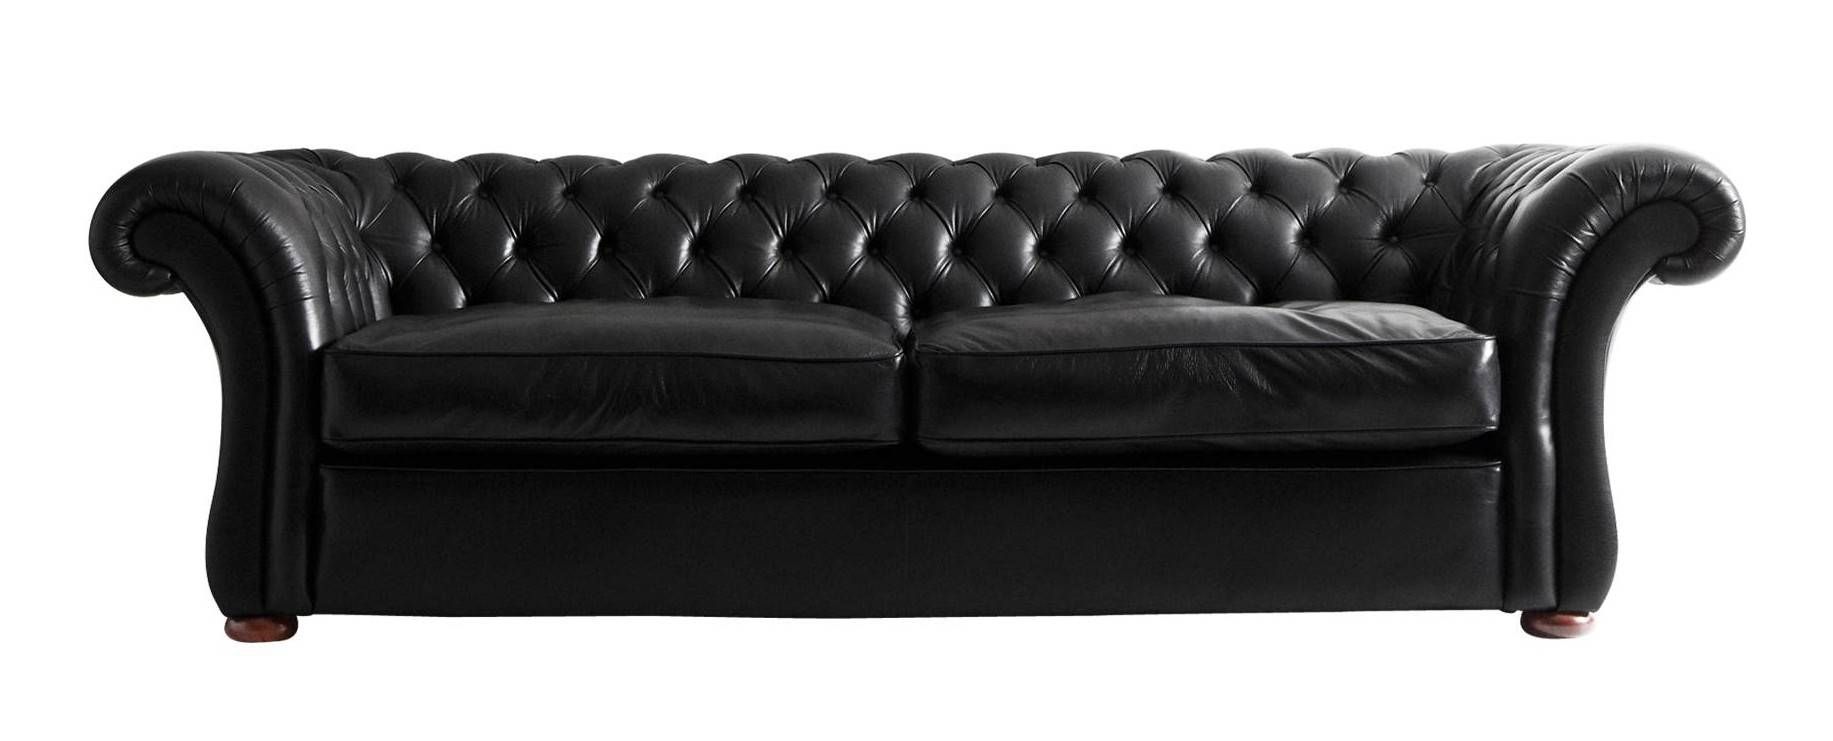 Furniture: Stunning Tufted White Leather Chesterfield Sofa As For Tufted Leather Chesterfield Sofas (Photo 16 of 30)